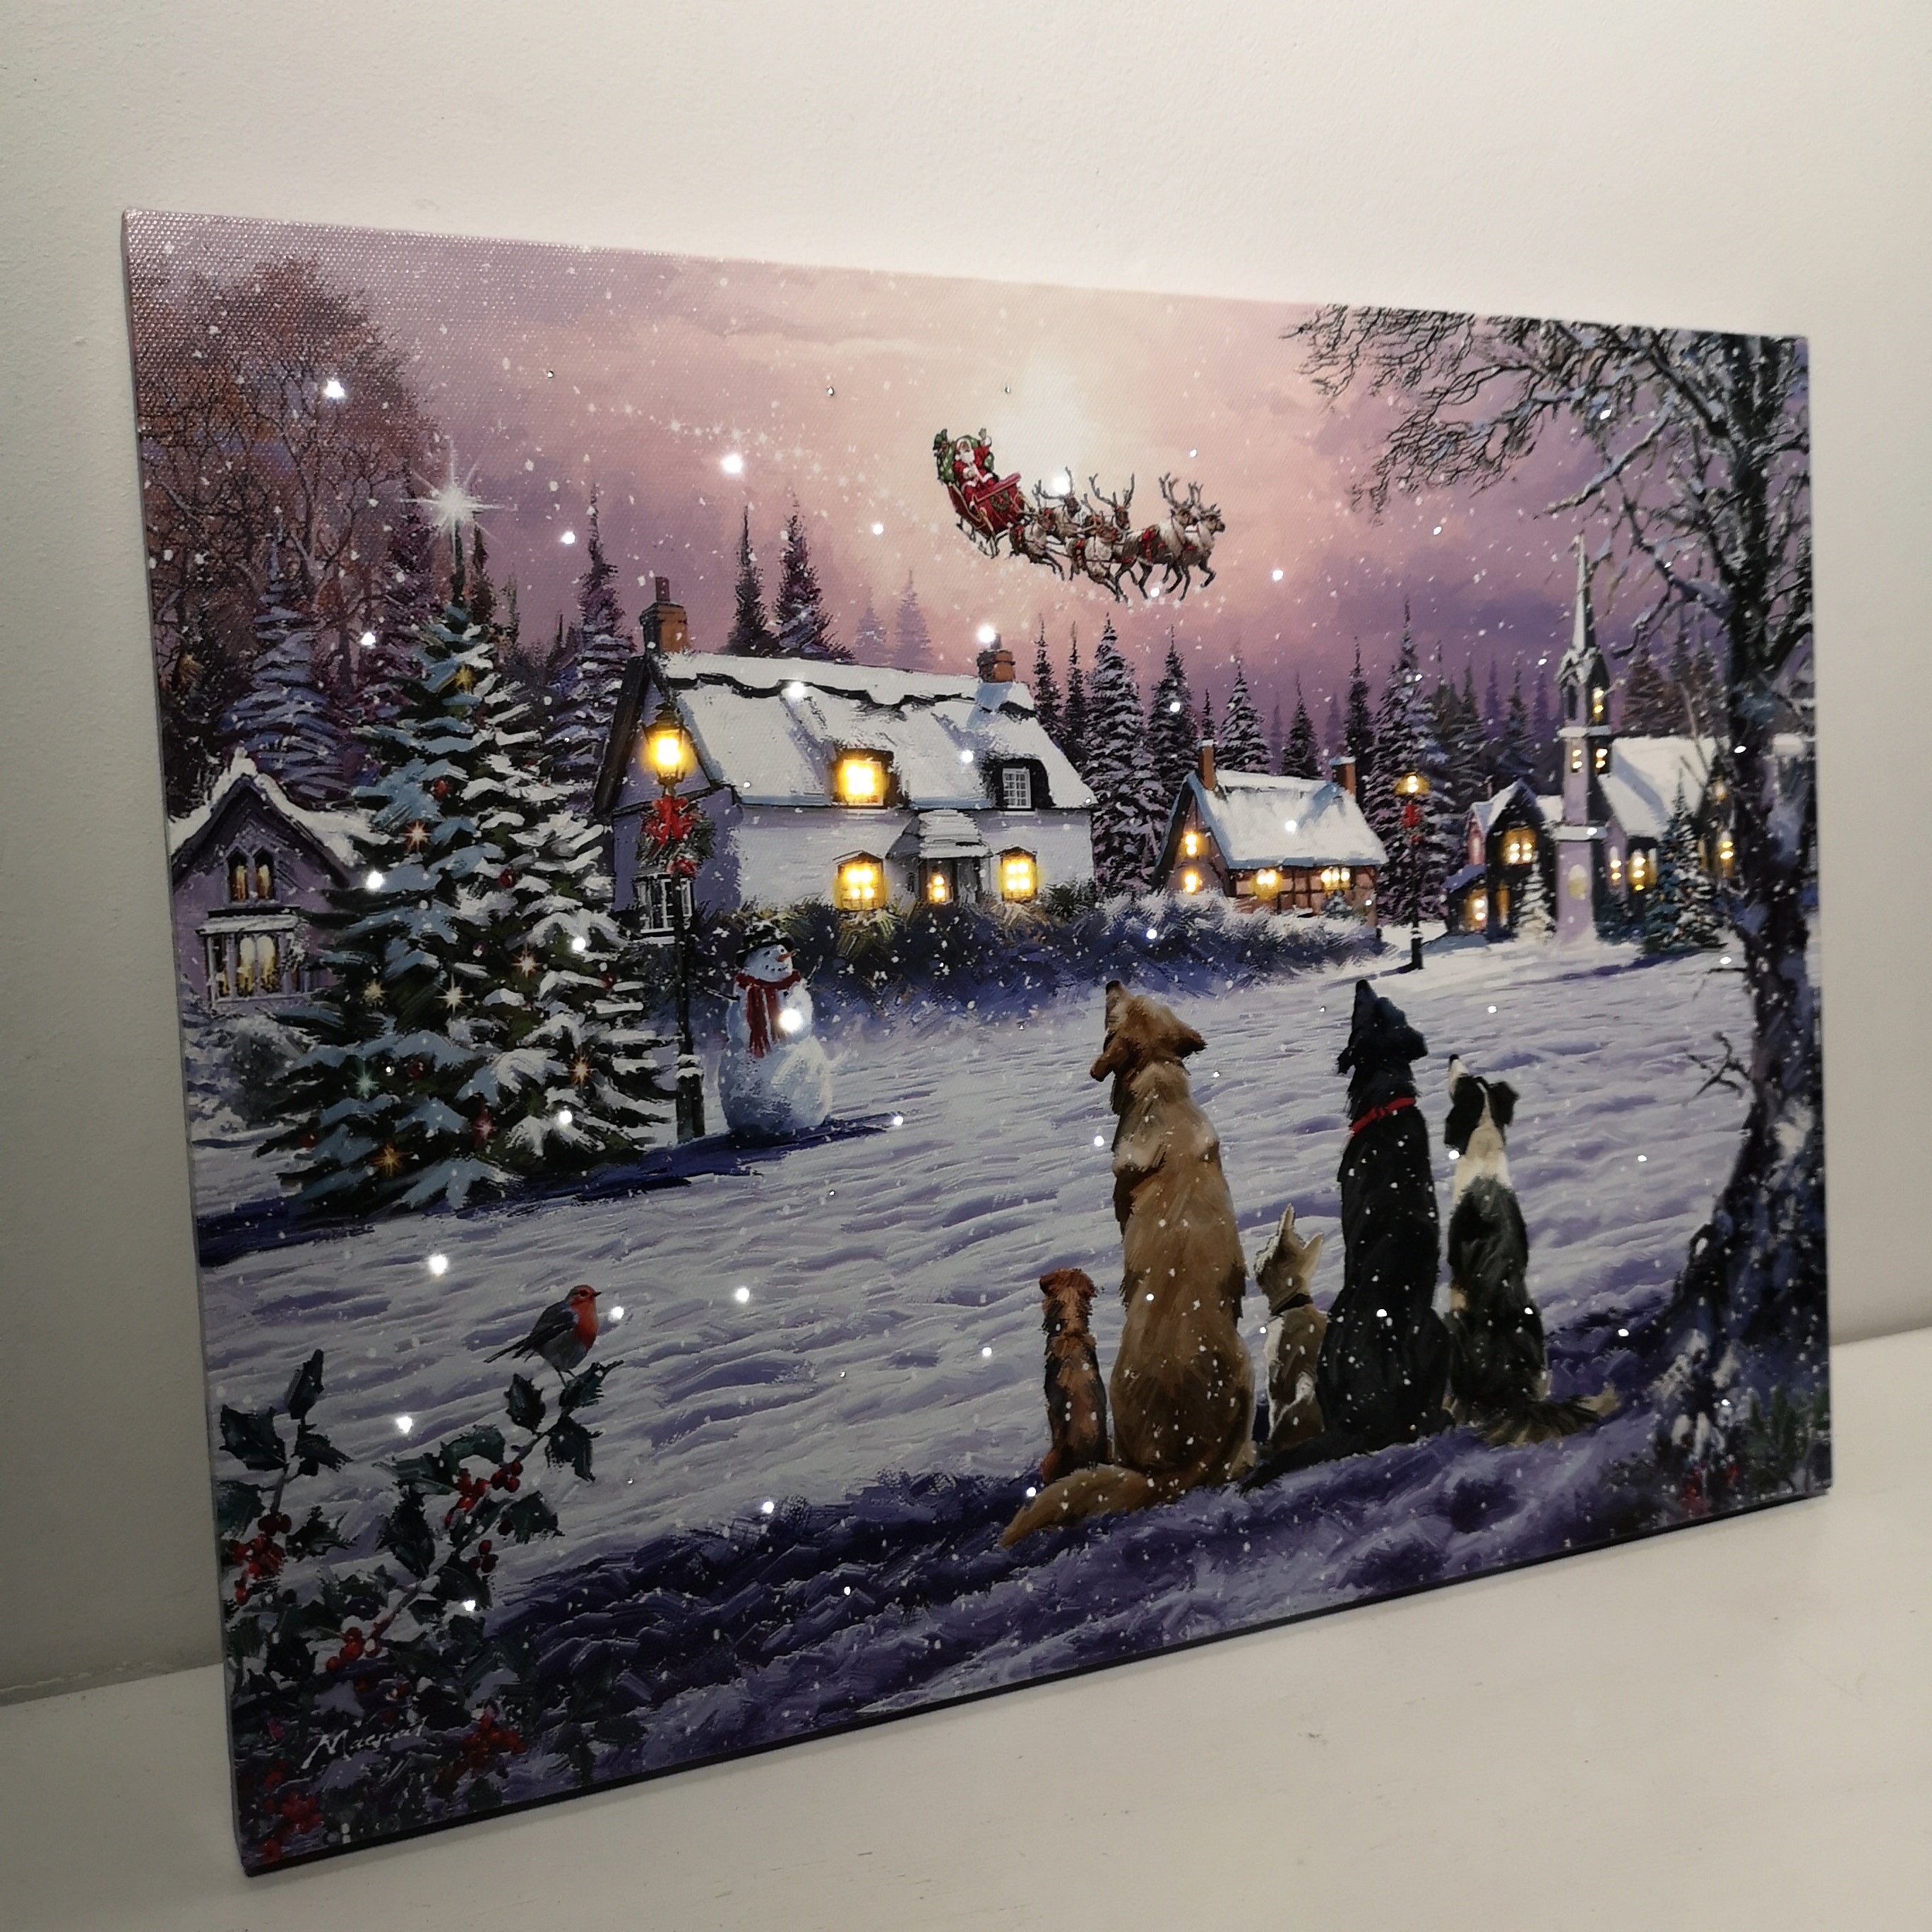 40 x 30cm Tap Activated Fibre Optic Christmas Wall Art Canvas with Dogs Watching Santa Scene